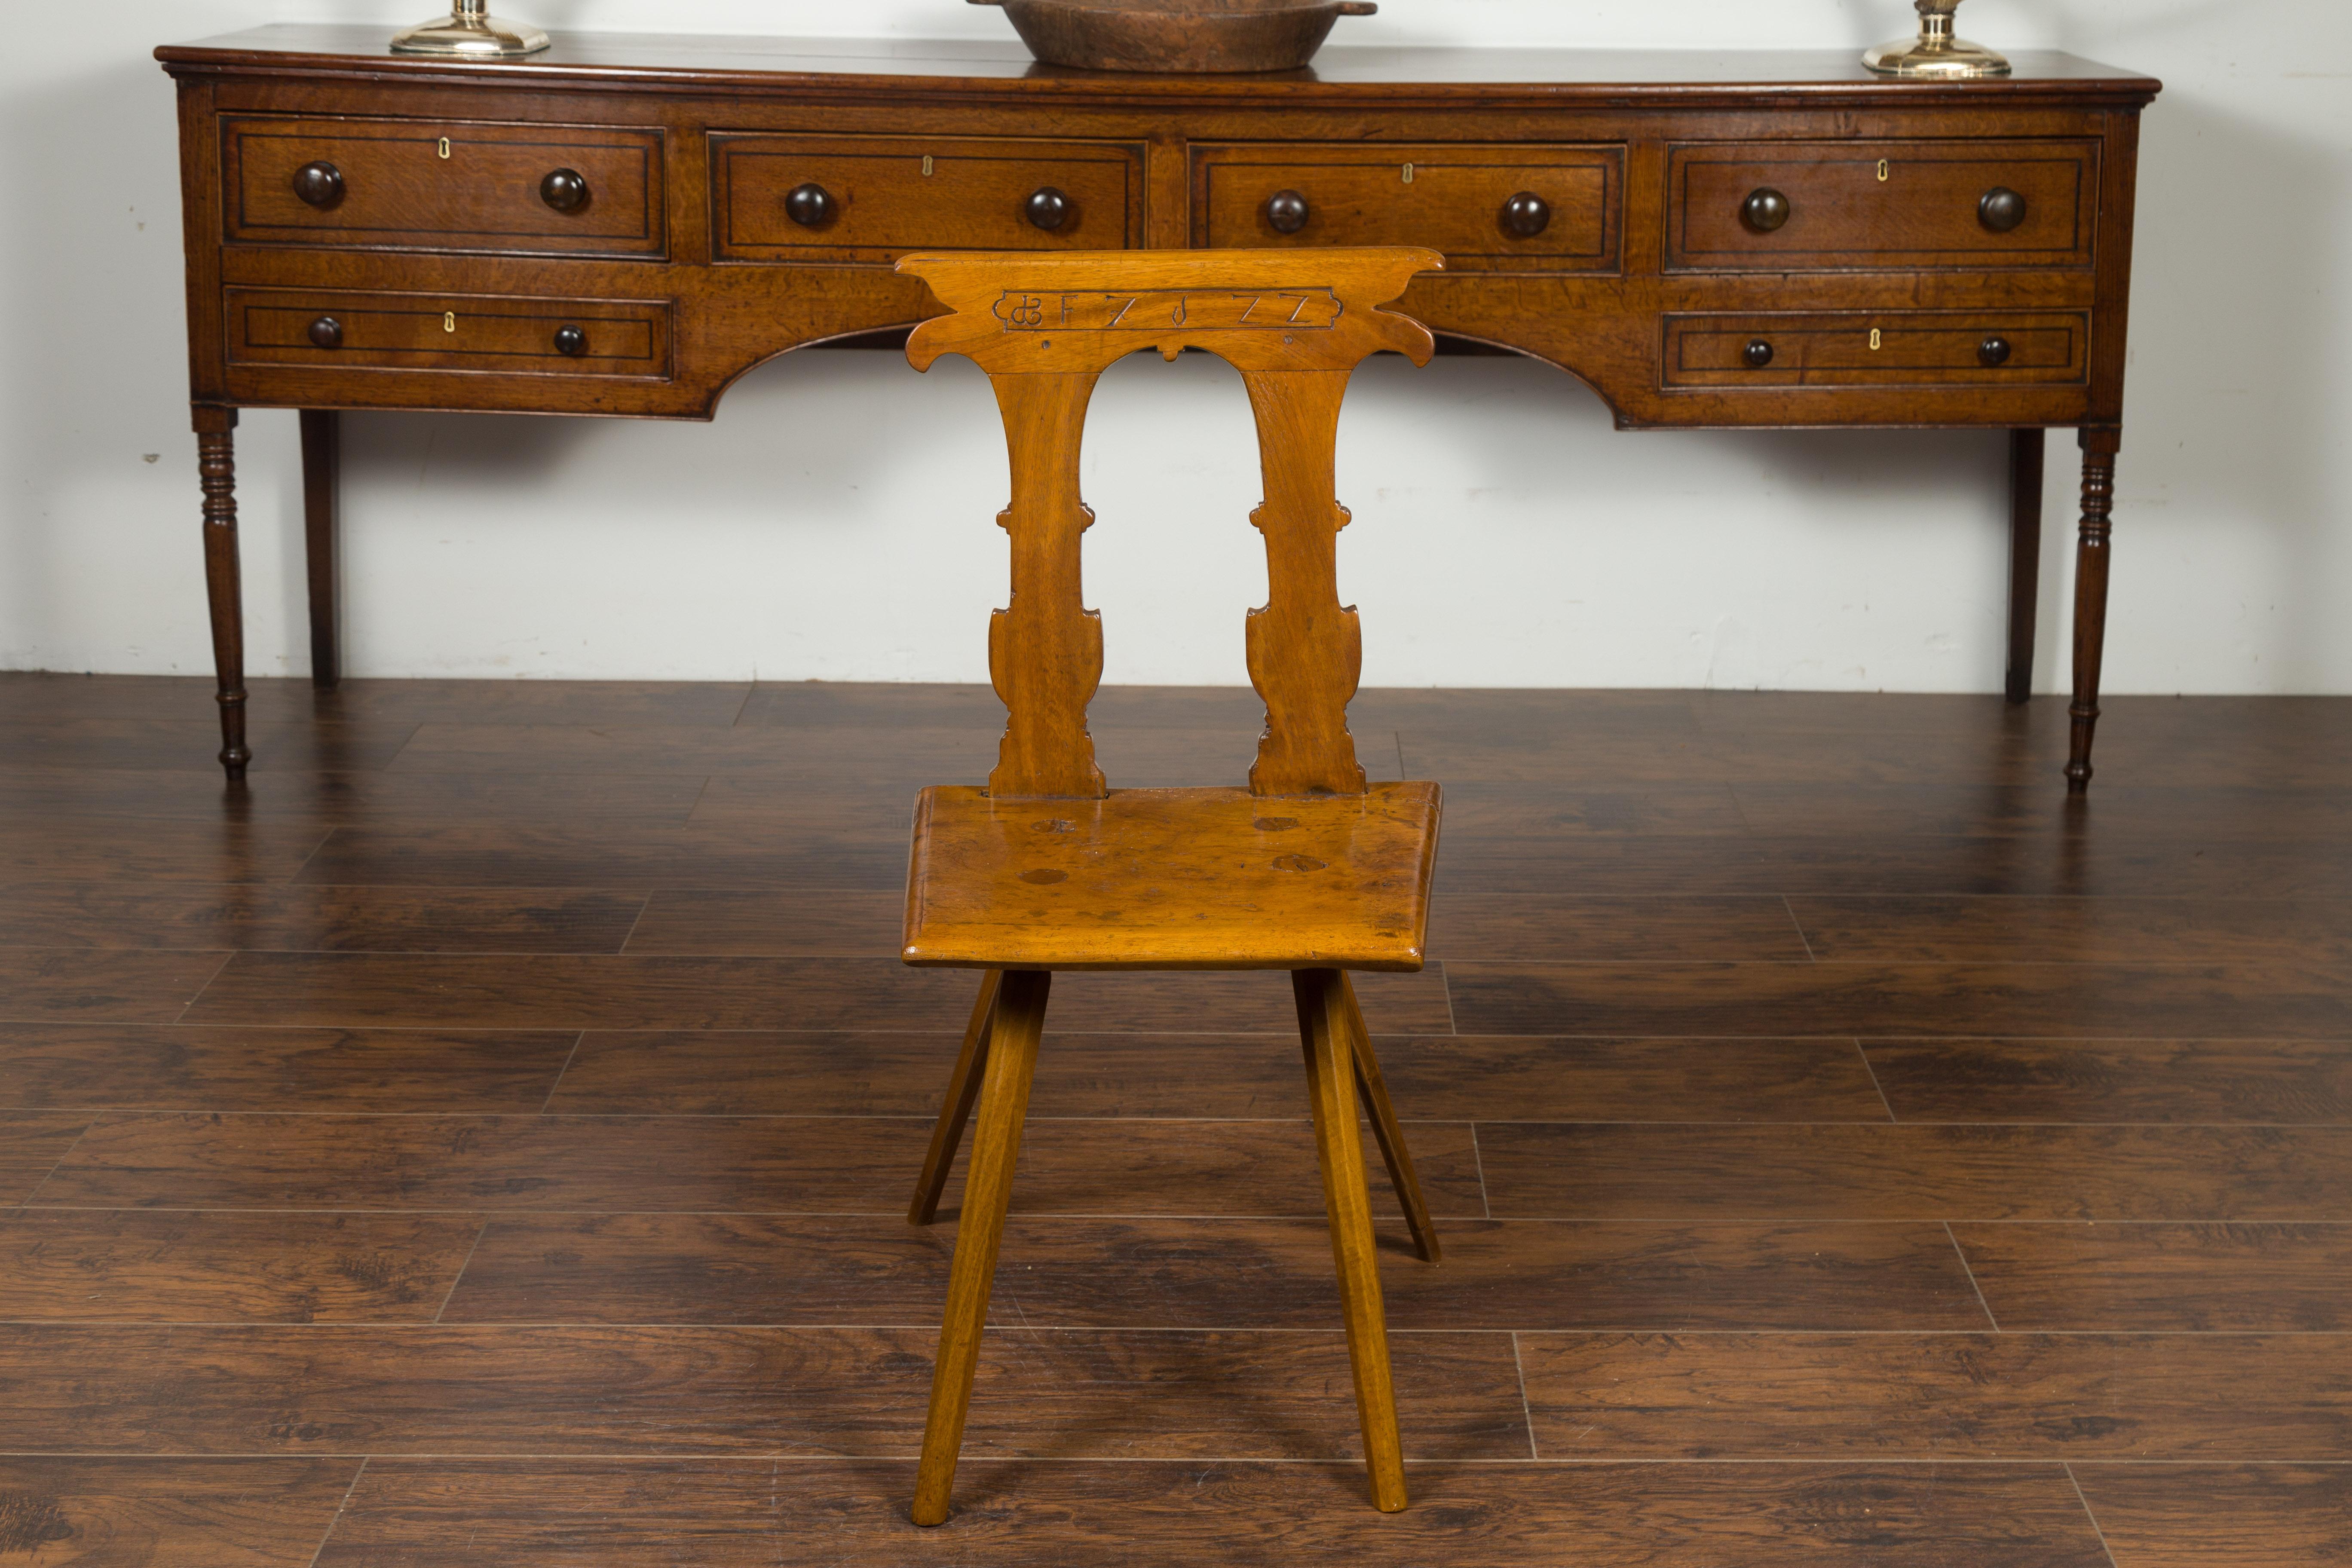 An English oak hall chair from the mid-19th century, with pierced back, carved letters and wooden seat. Created in England during the 1850s, this oak hall chair features a slightly slanted back, pierced in its center, carved on the sides and incised